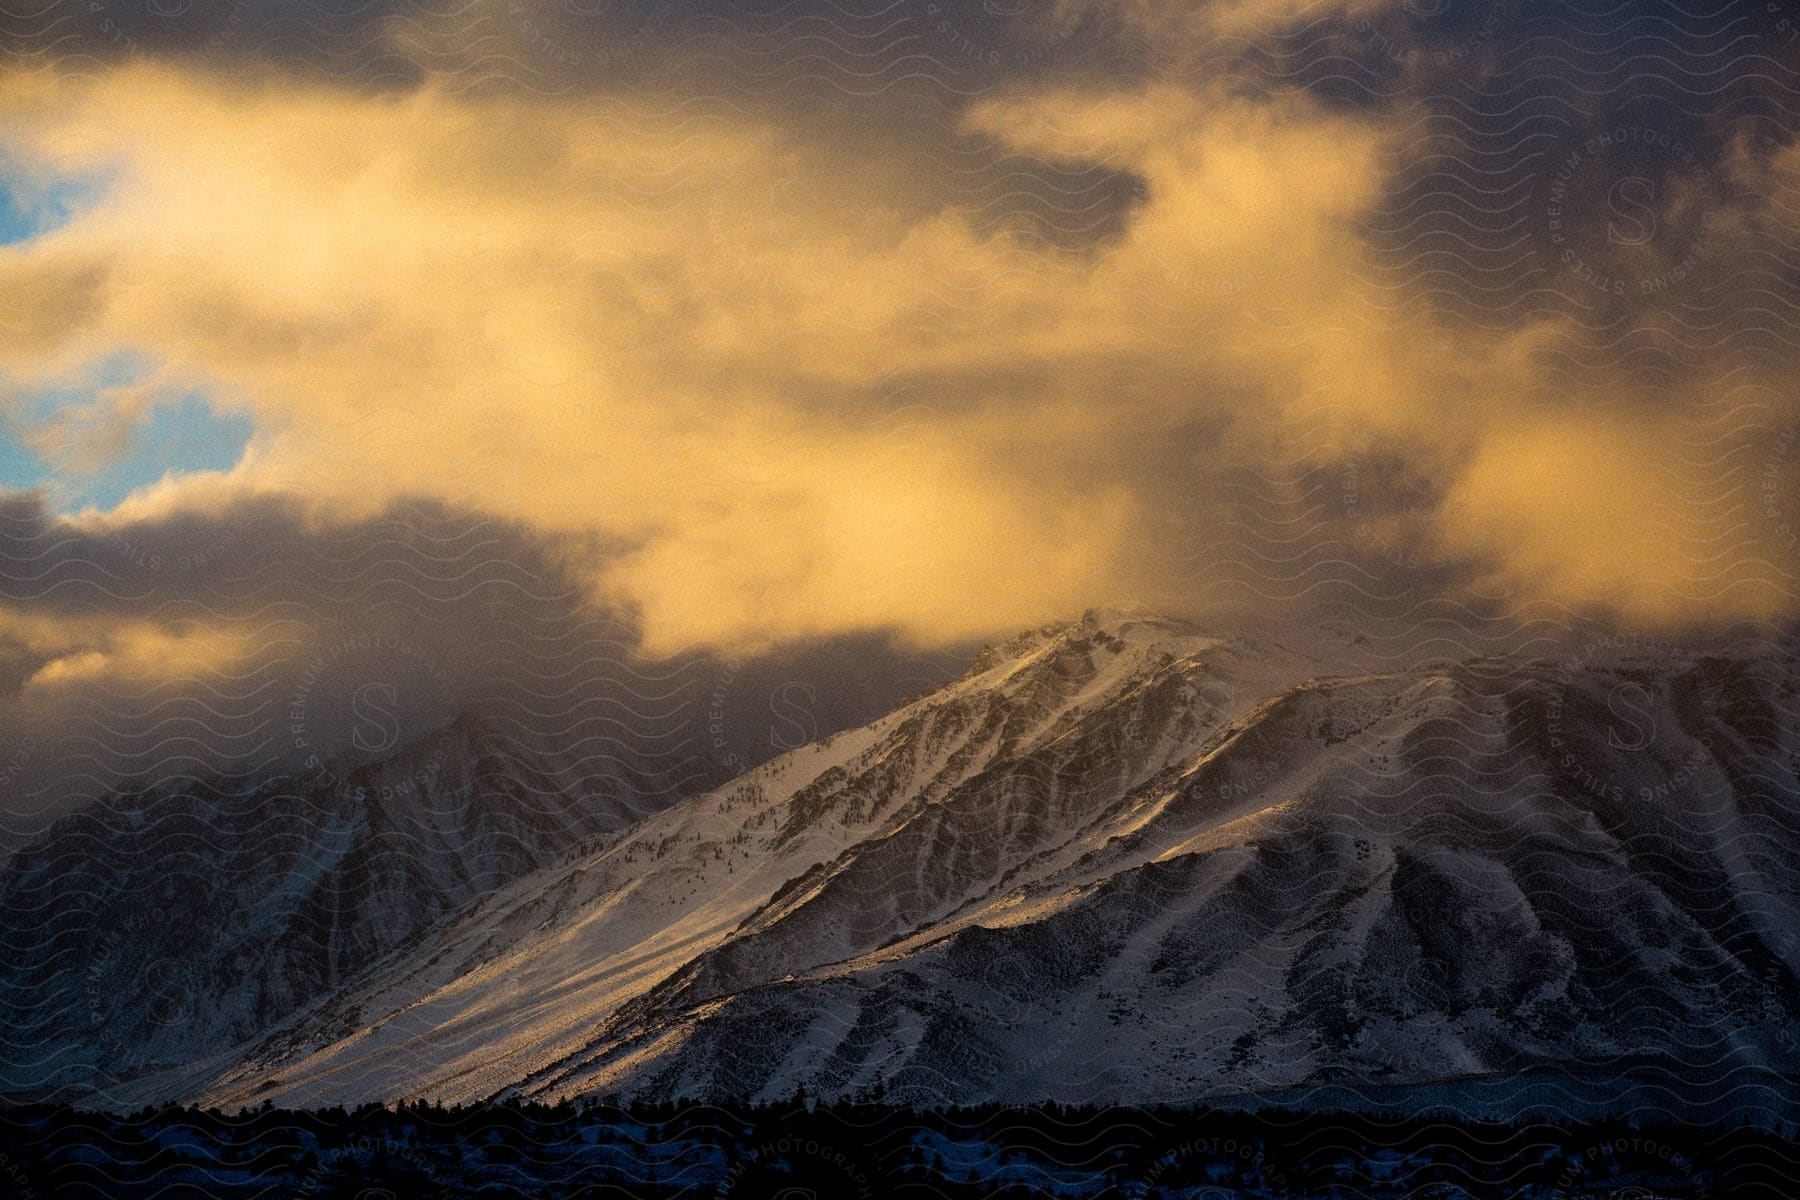 Snowcovered valley at sunrise with a snowcapped mountain range in the background peaks hidden by clouds